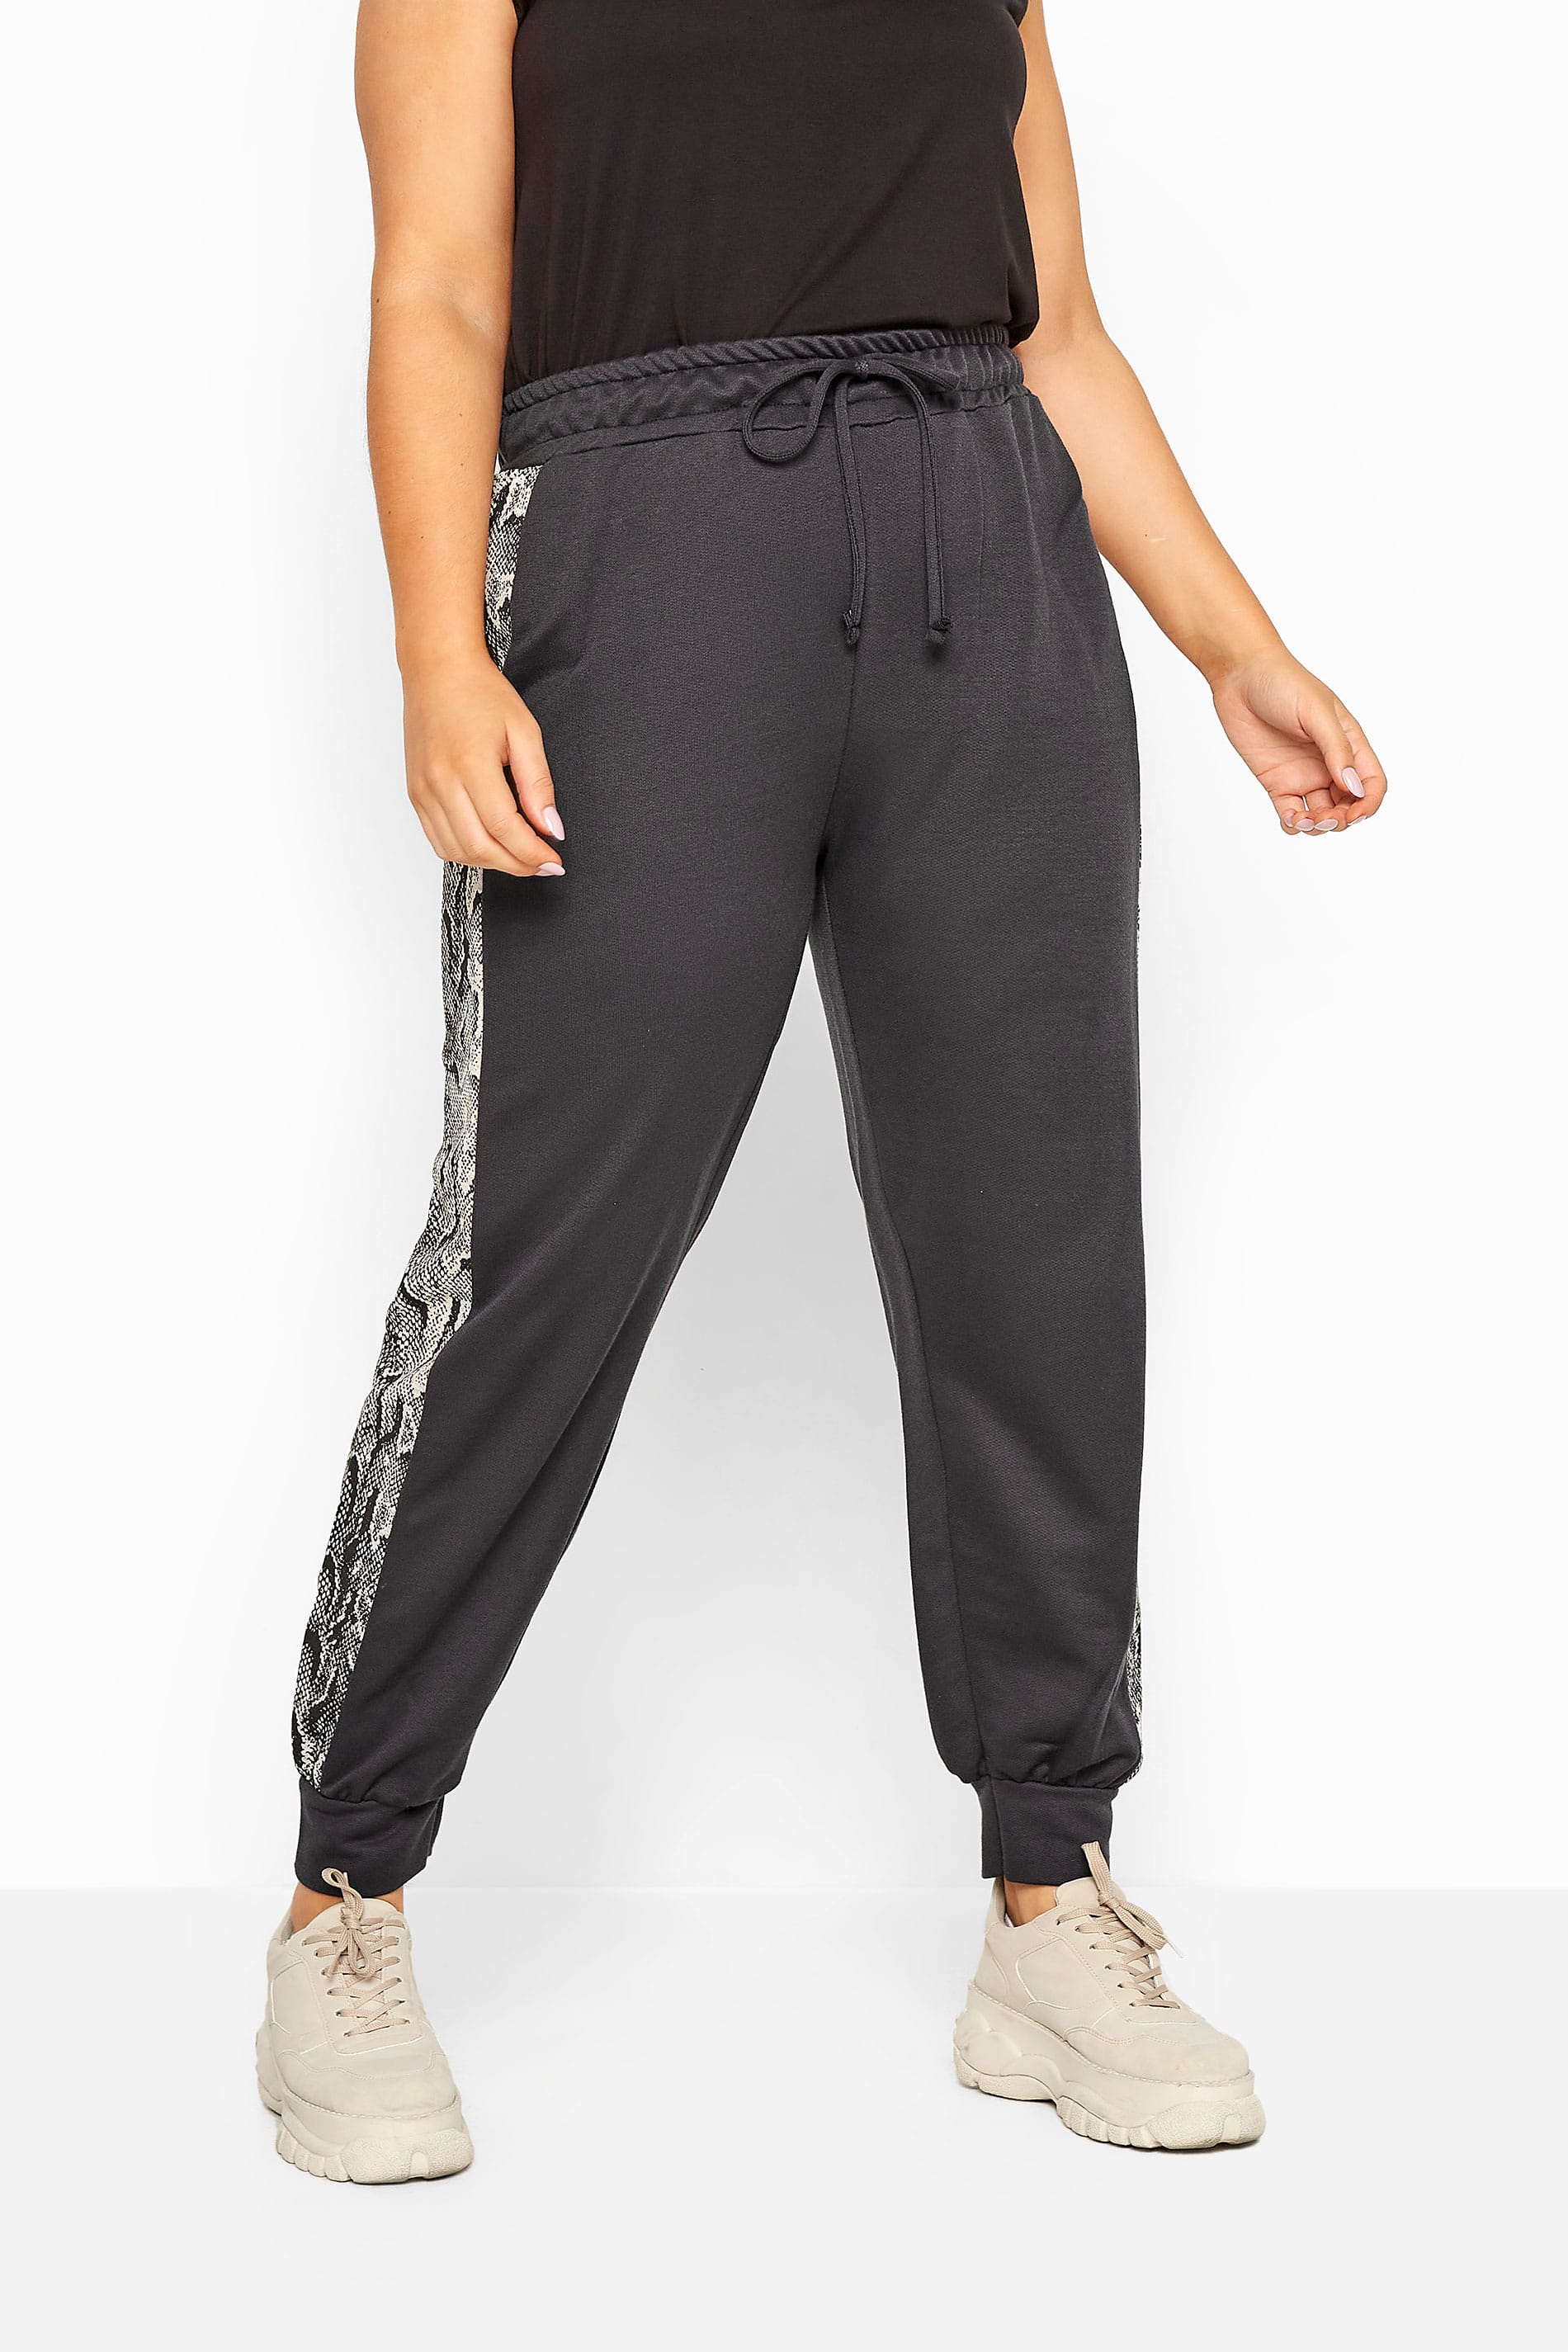 Charcoal Grey Snake Print Panel Joggers | Yours Clothing